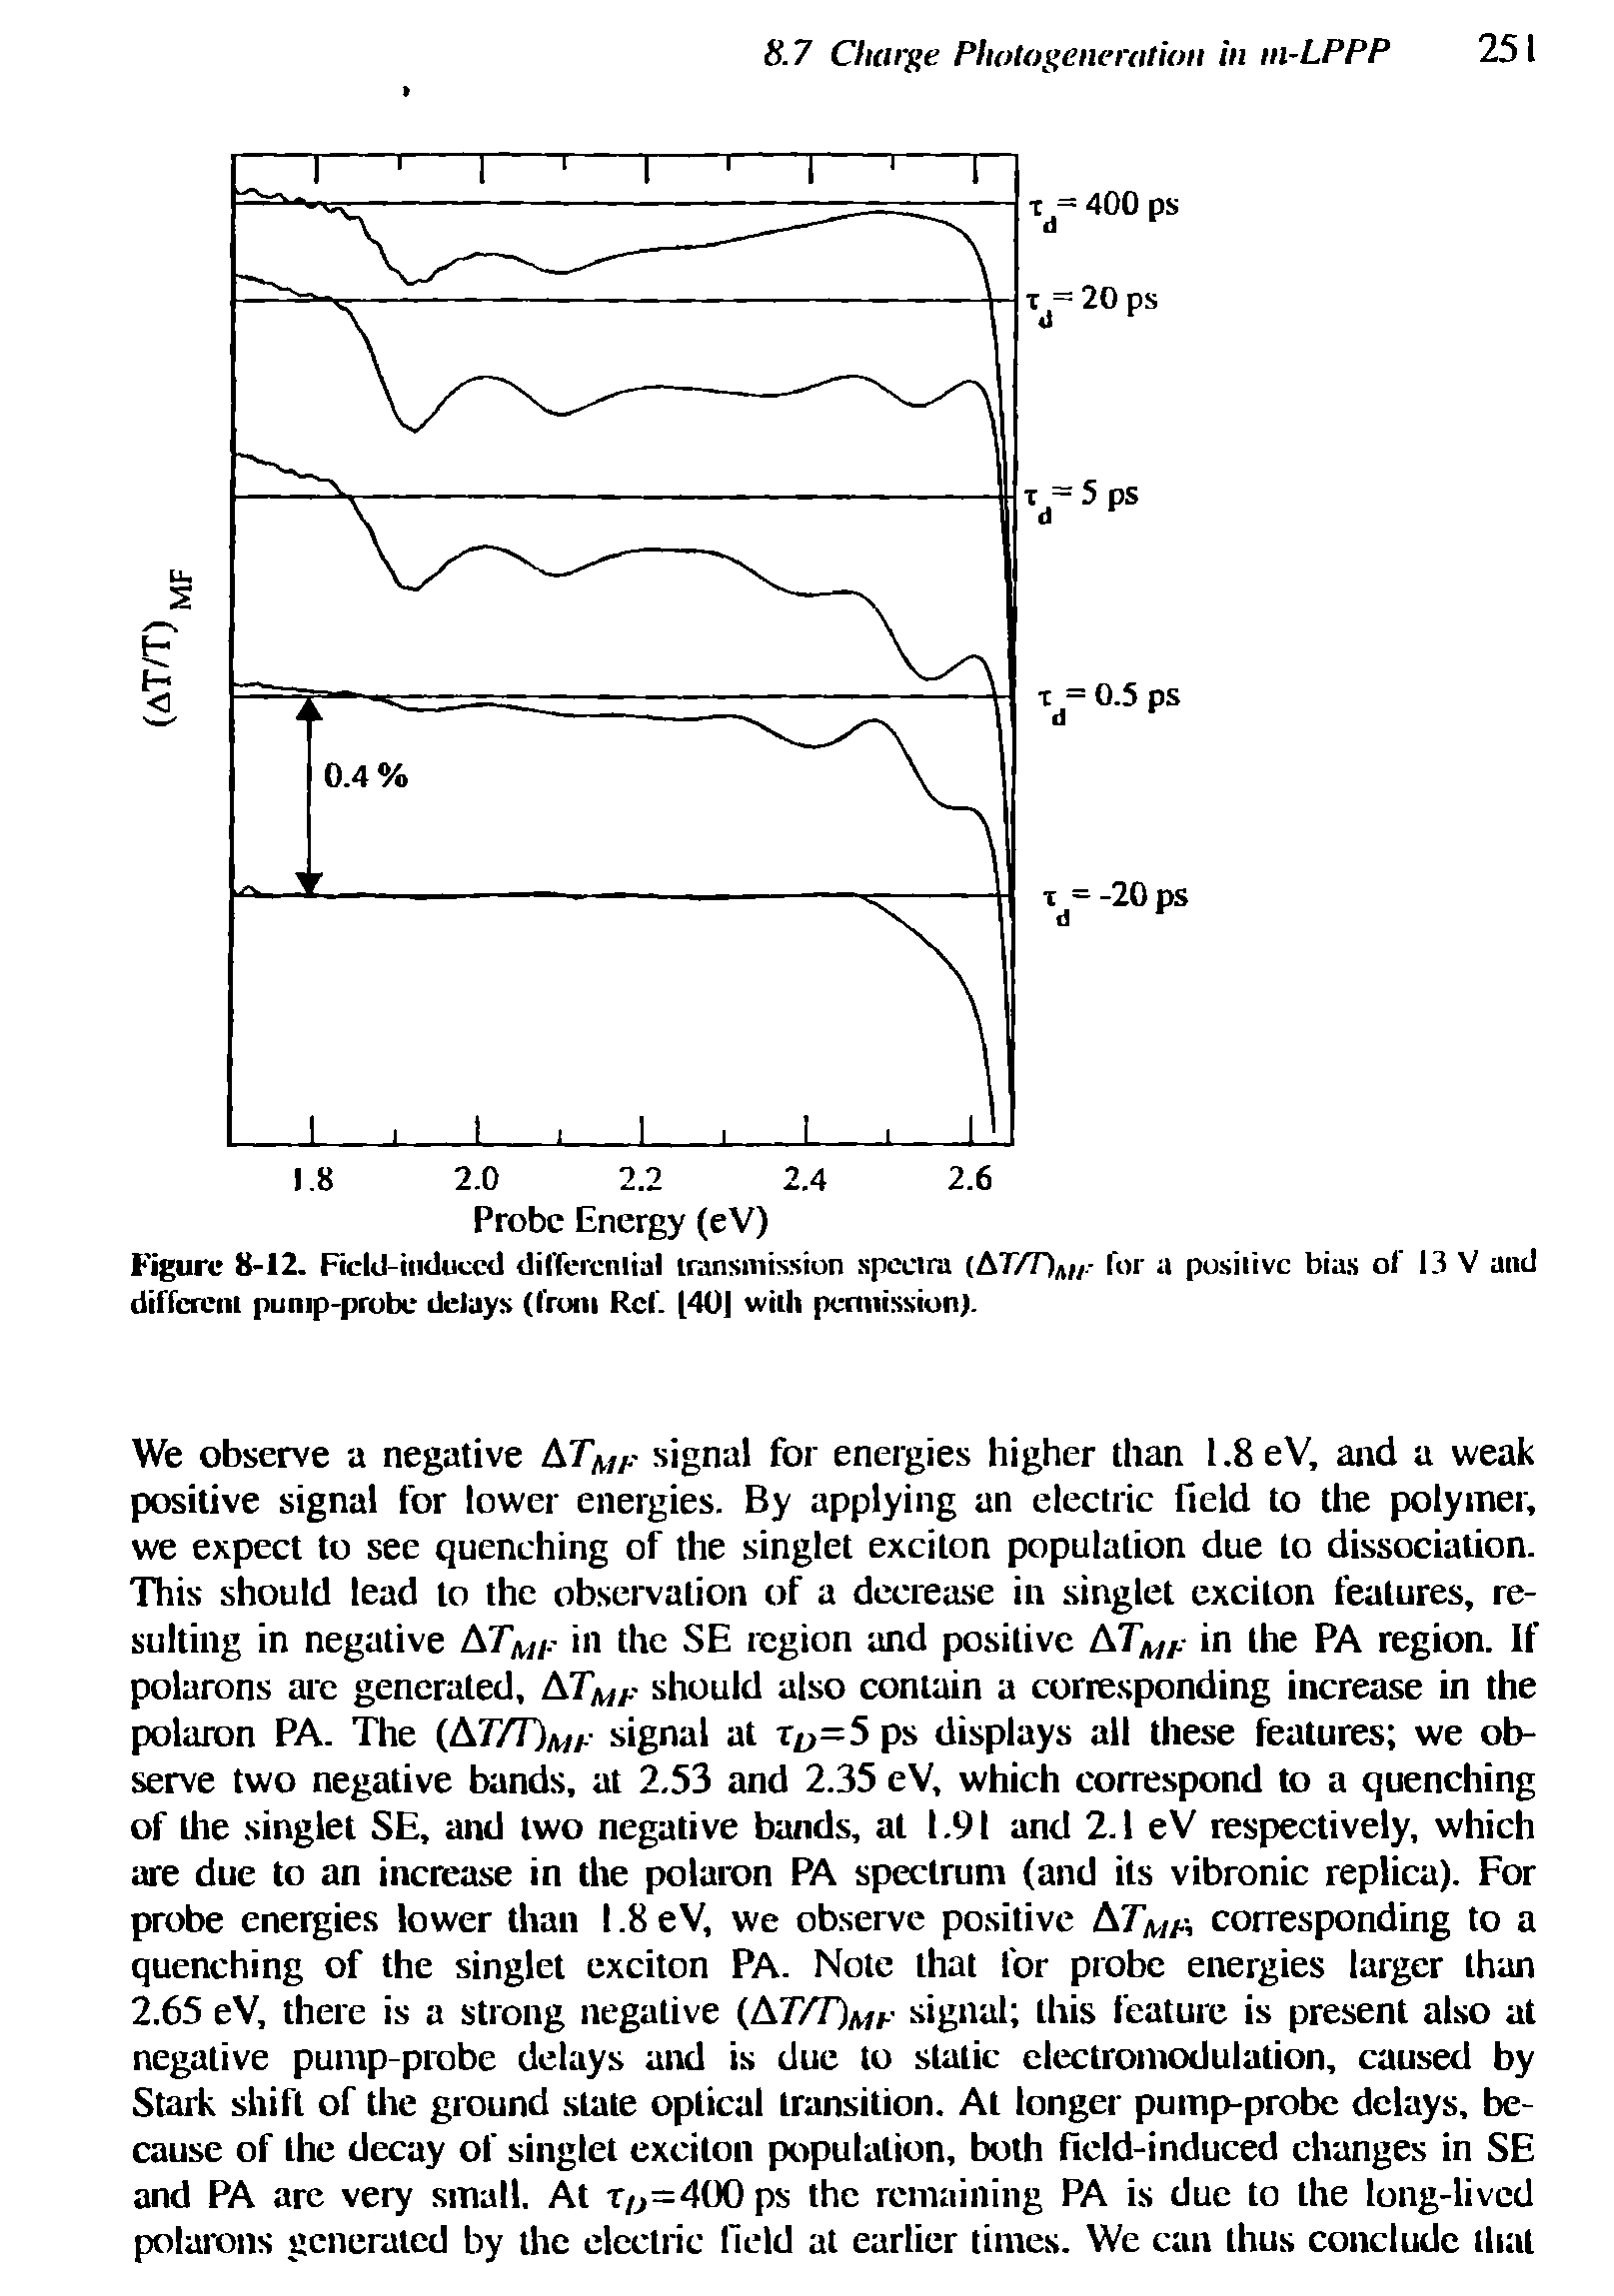 Figure 8-12. Field-induced differential transmission spectra (A7/T)a)/.- for a positive bias of 13 V and different pump-probe delays (front Ref. [401 with permission).